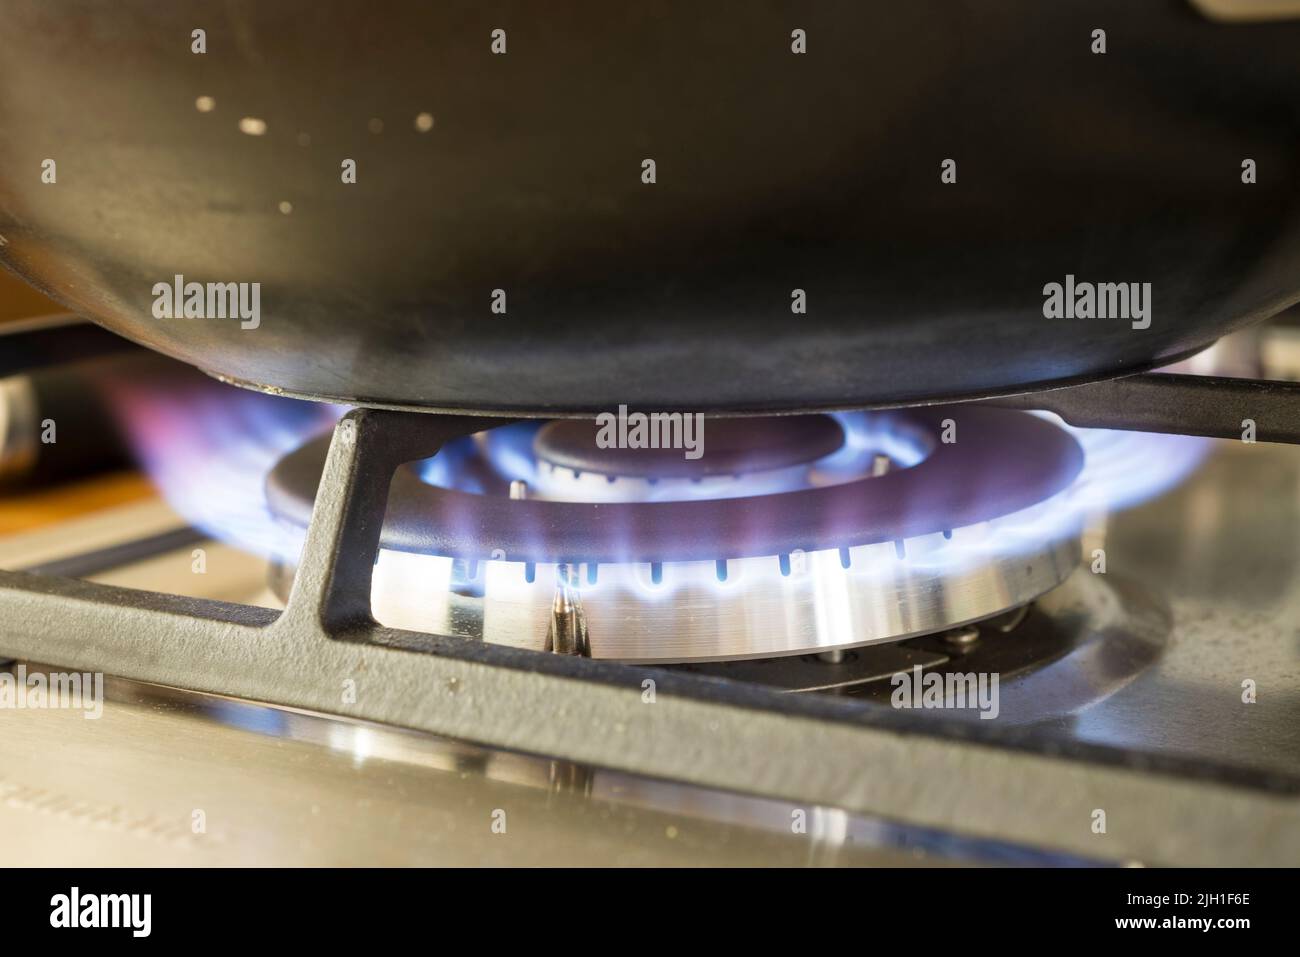 Cooking with gas, UK Stock Photo